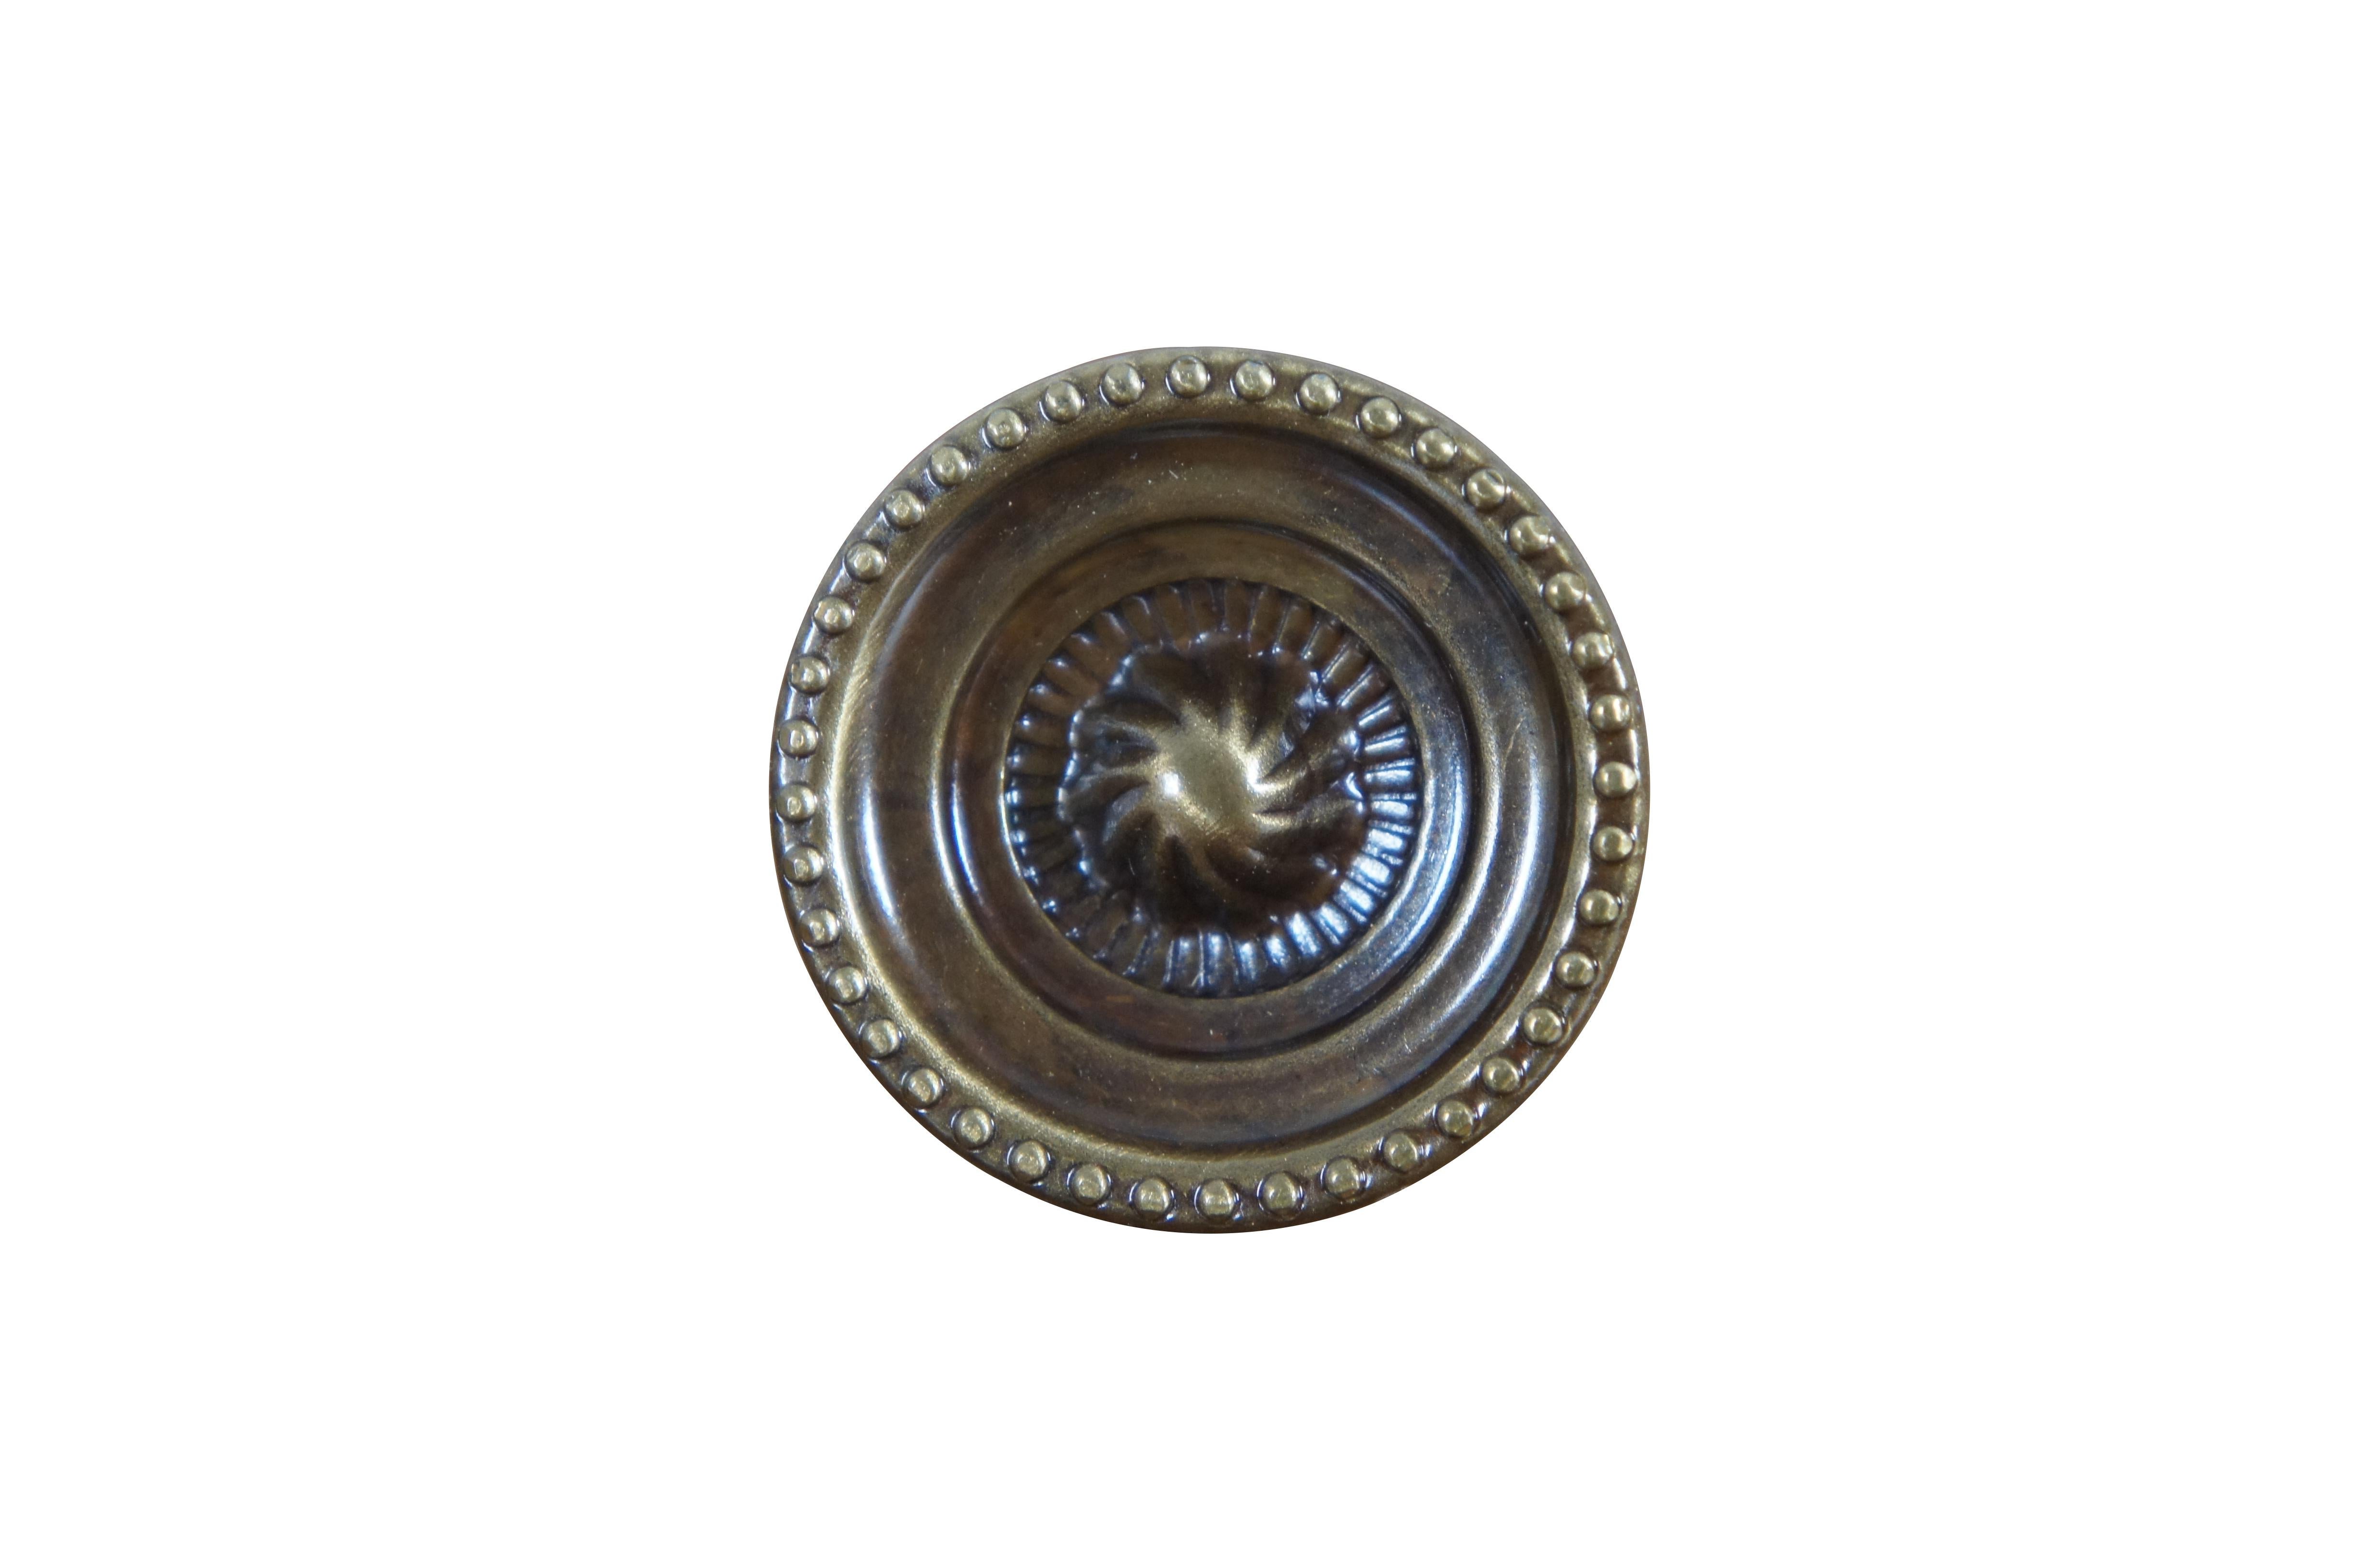 31 Available - Mid to late 20th century old-stock drawer / cabinet pulls. National Lock Company - Medalist, item number C606-4A Knob. Antique brass finish. Round / circular shape with spiral sunburst at center, framed in concentric grooves and